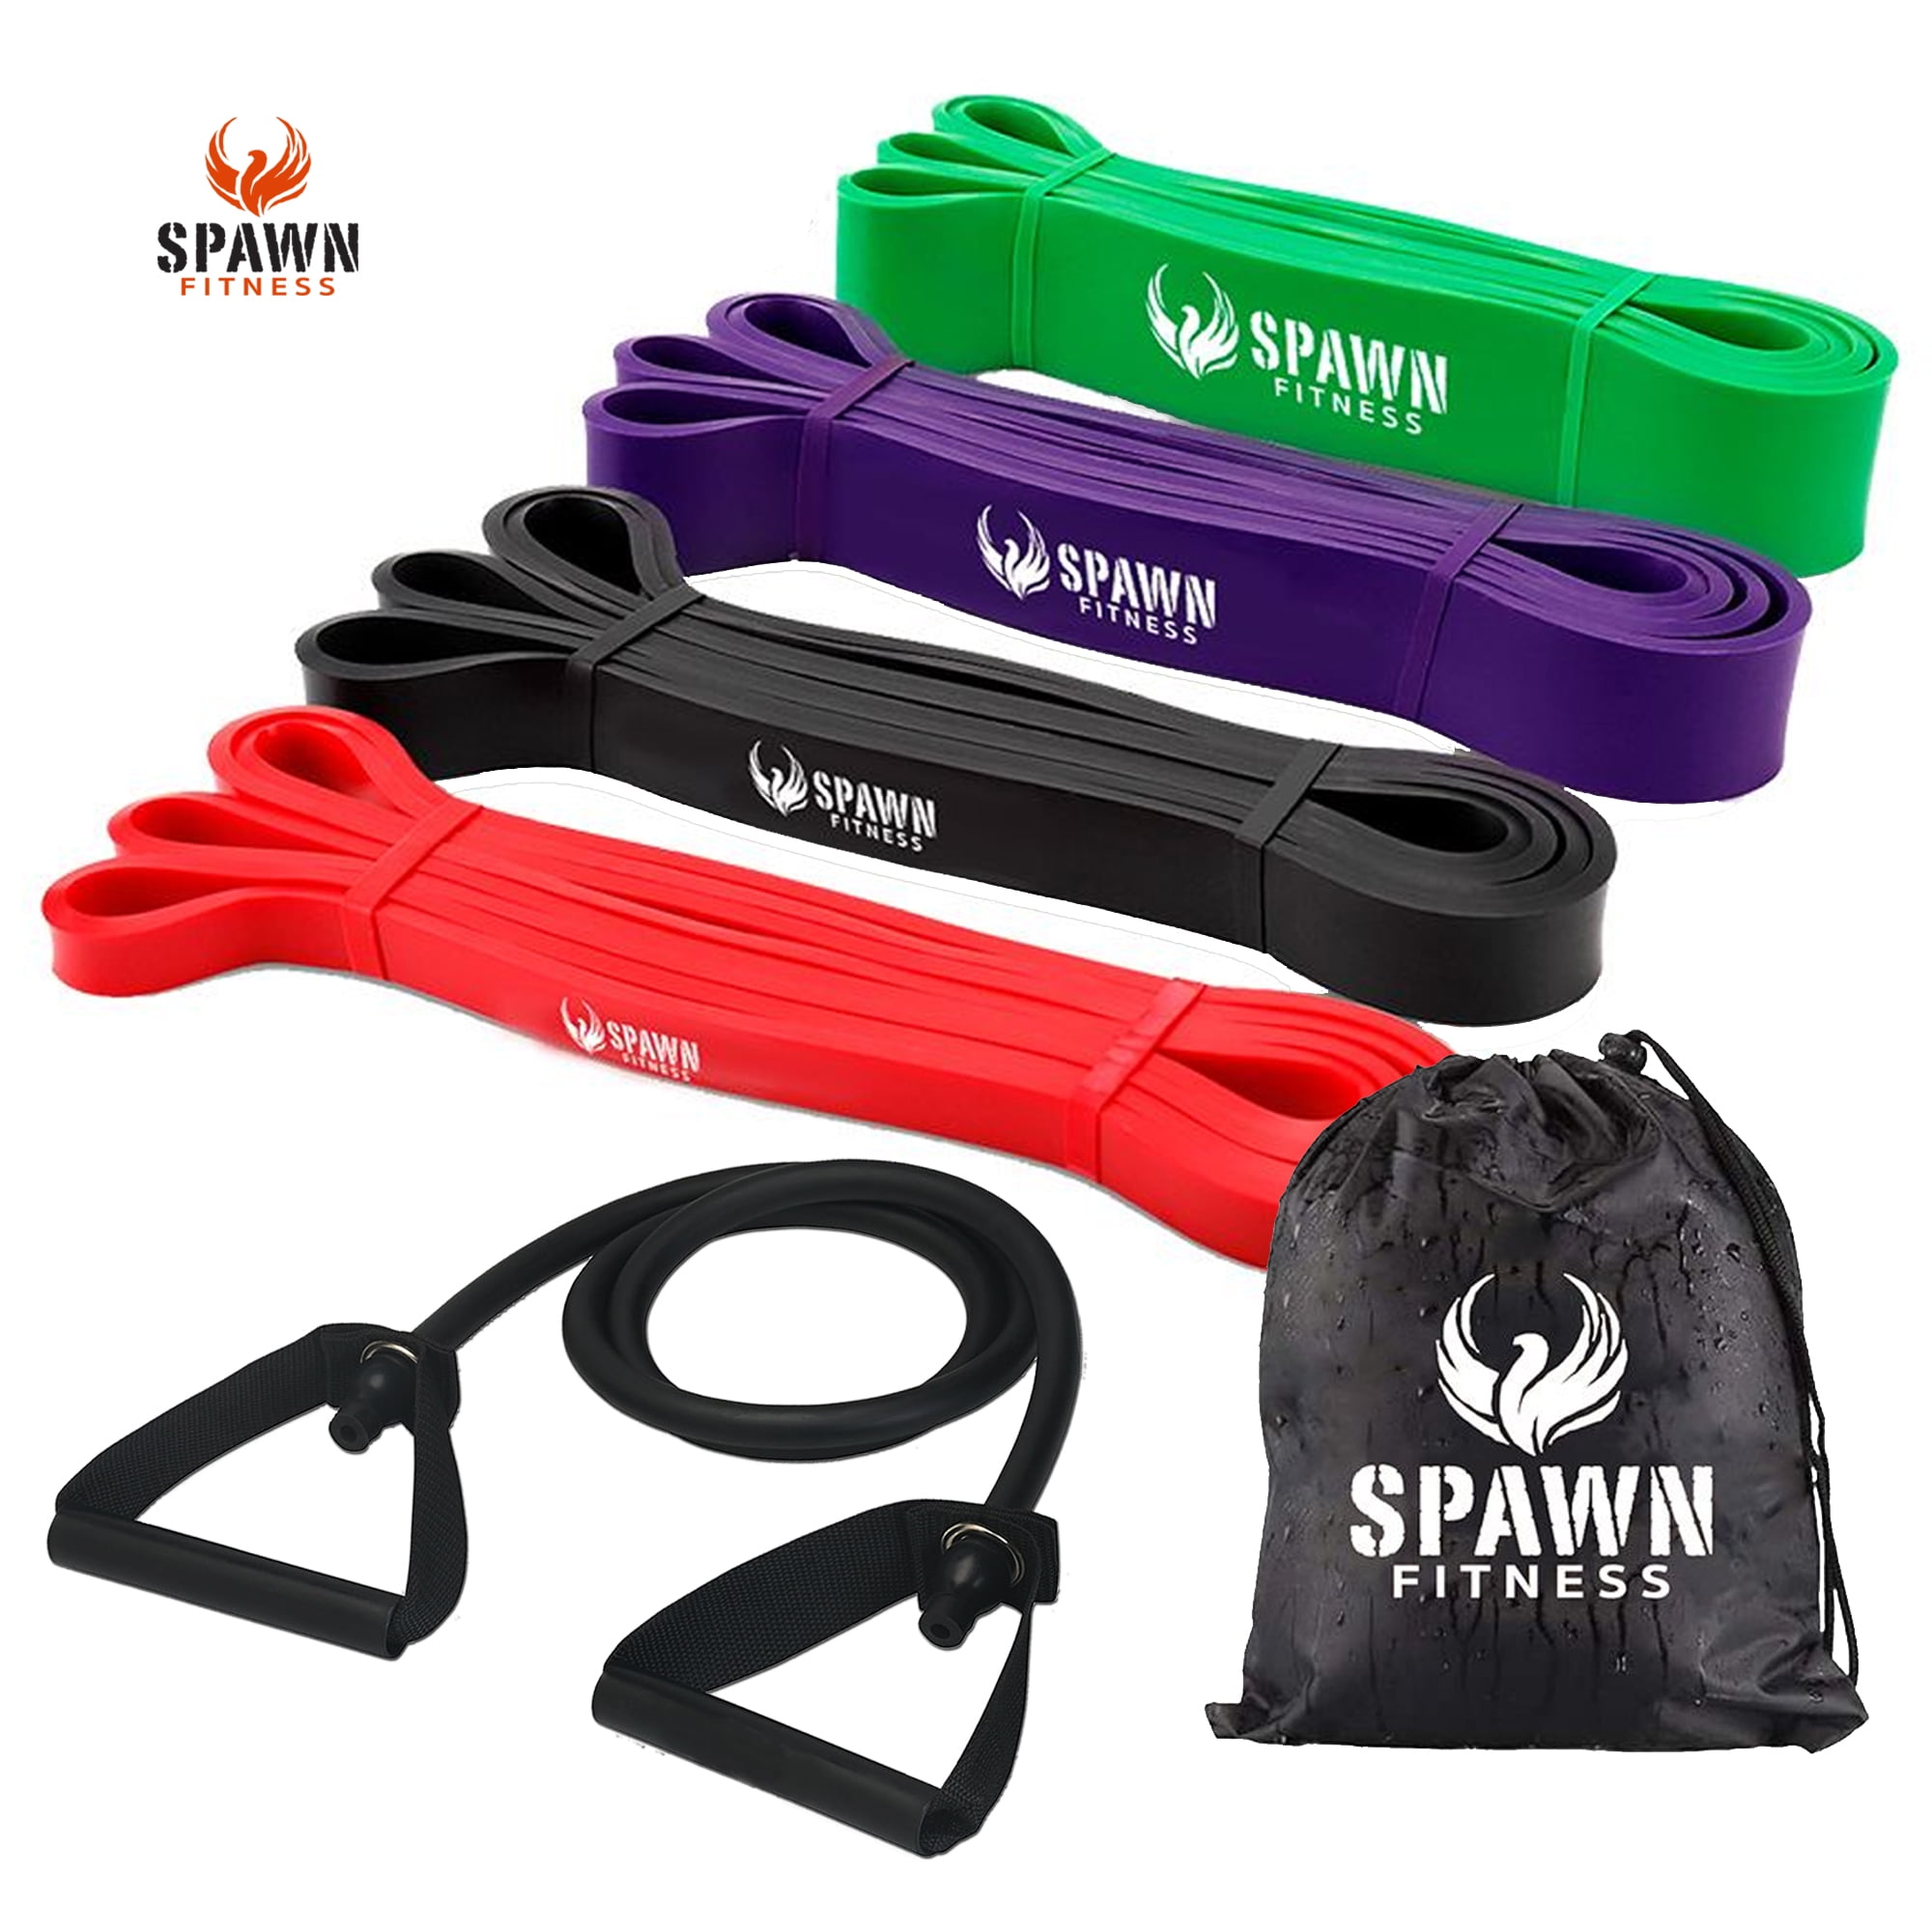 Spawn Fitness Resistance Bands Exercise with Handles for Workout